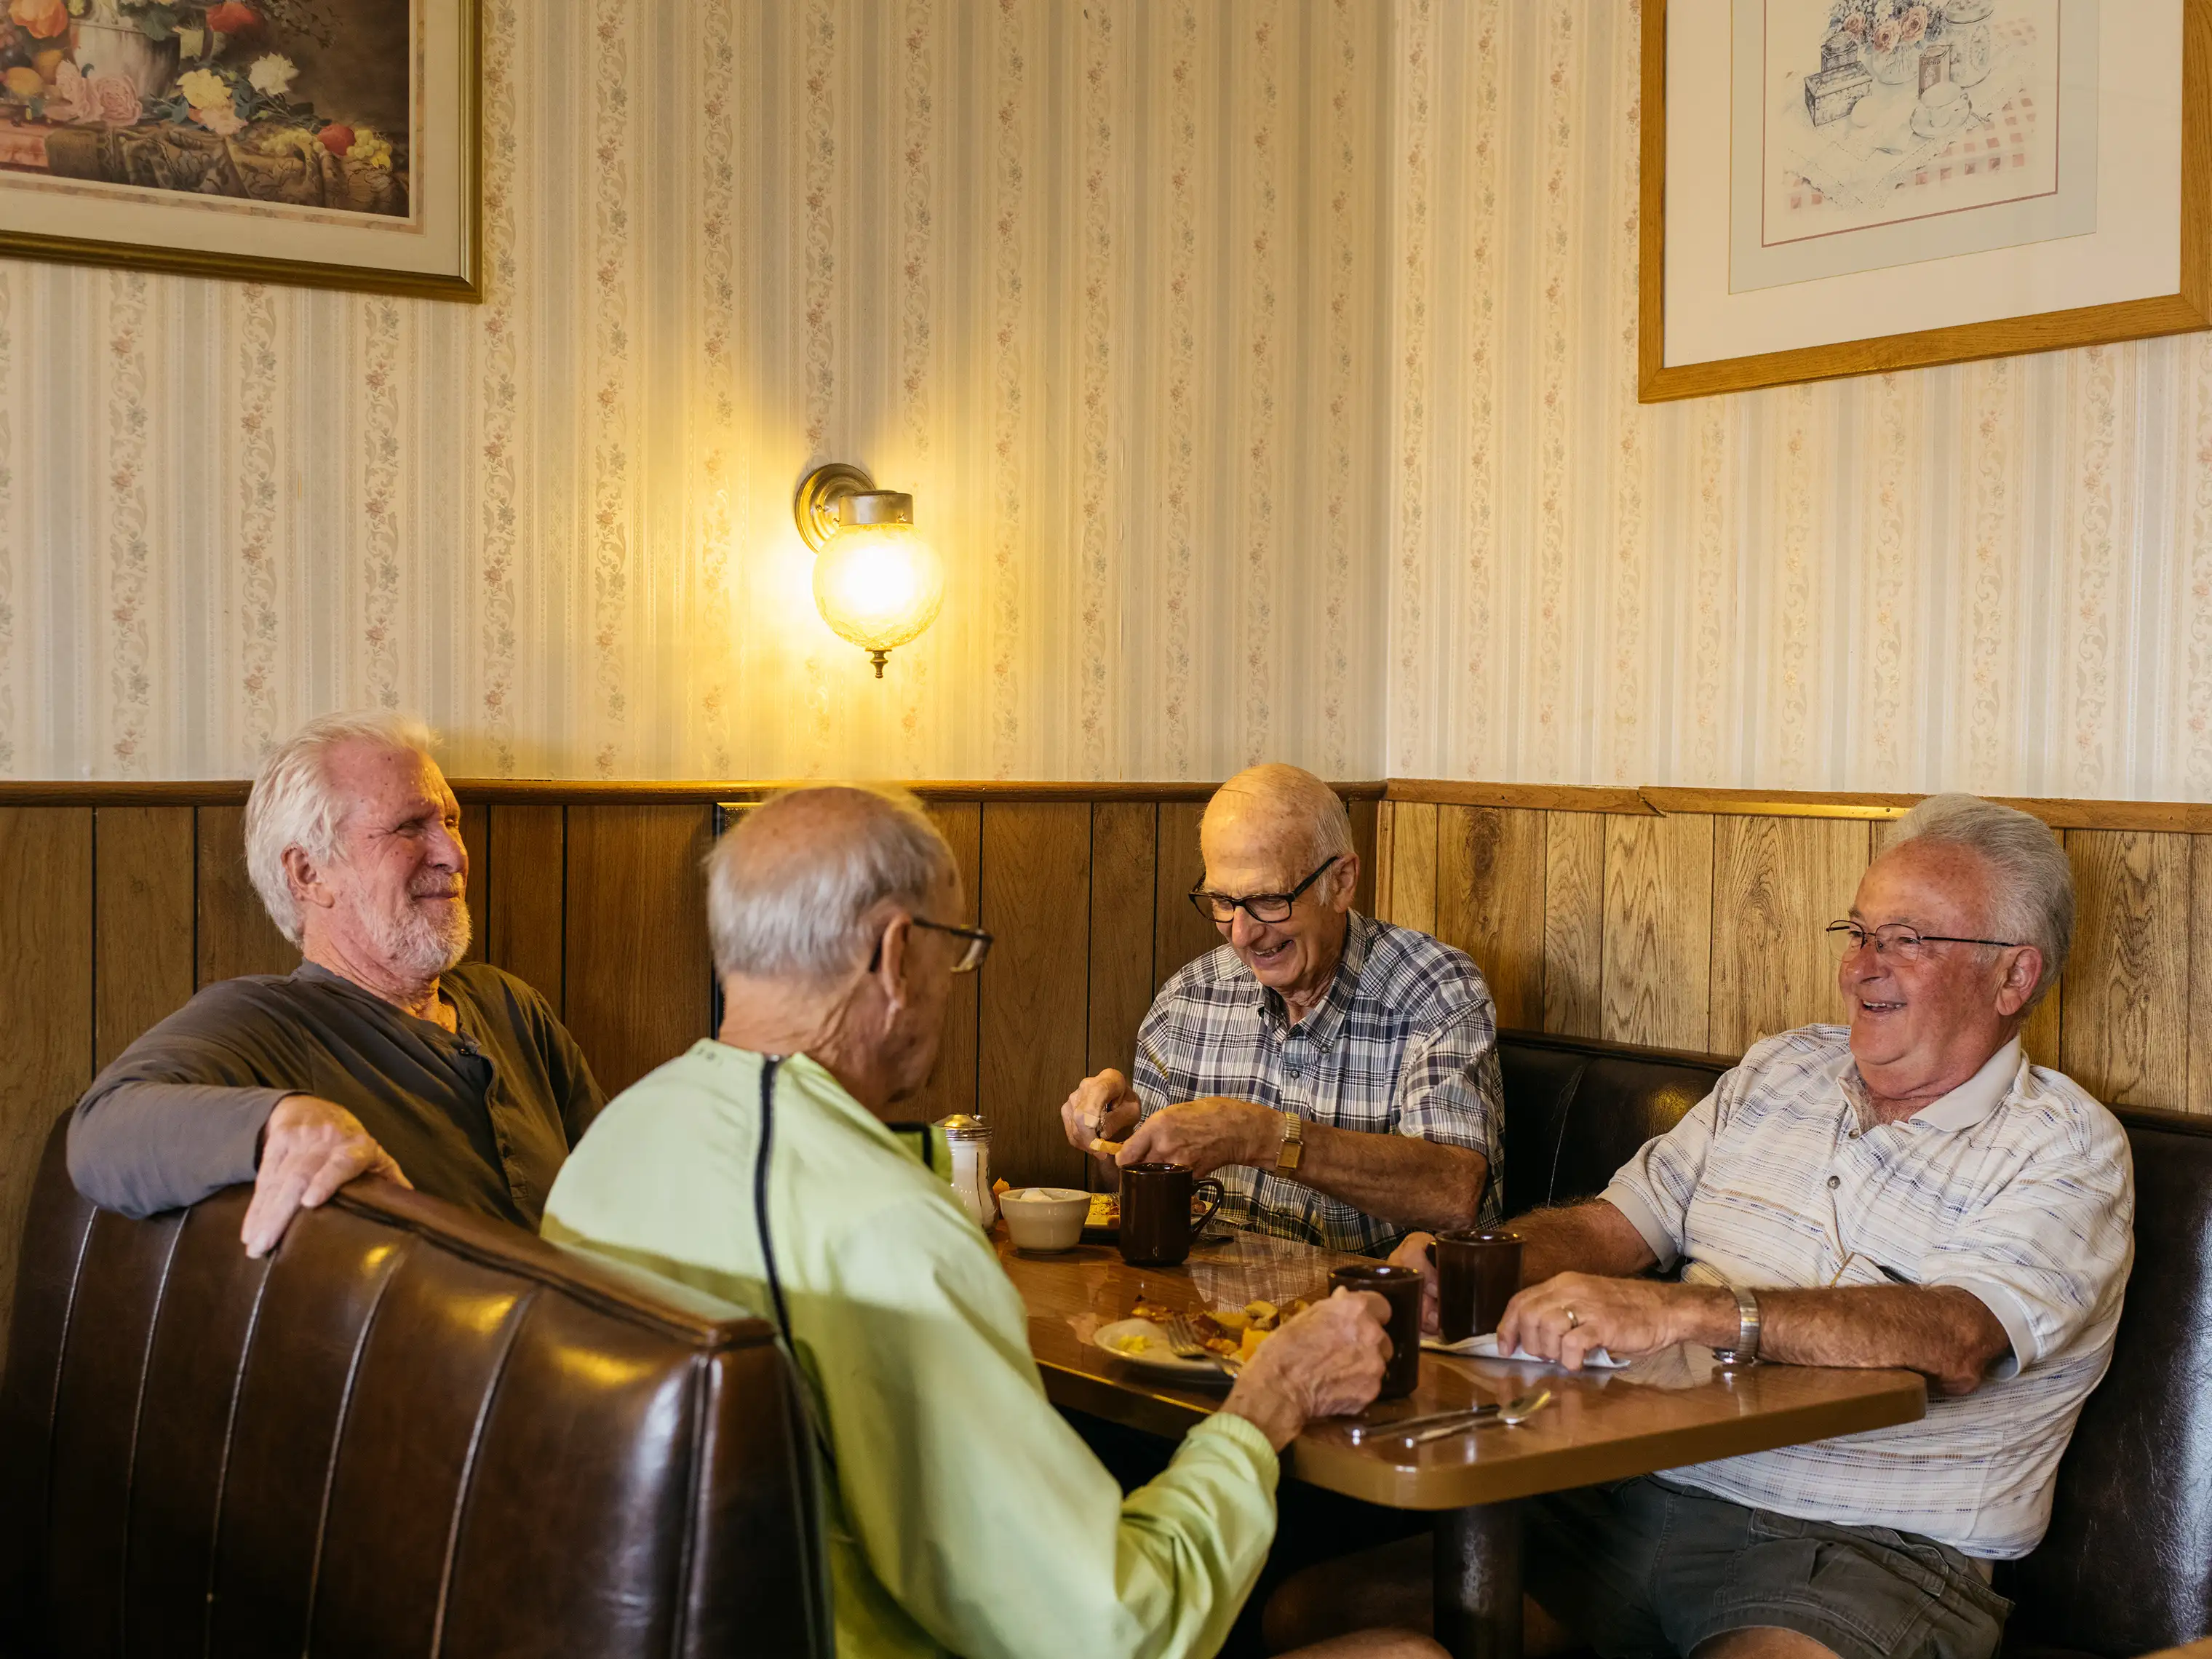 Wilbur Repp (third from left) having coffee with his daily breakfast group, Richard Ellsworth, Jack LeWarn and Ron Roberts, at Mary's Fine Foods in Kent, WA.